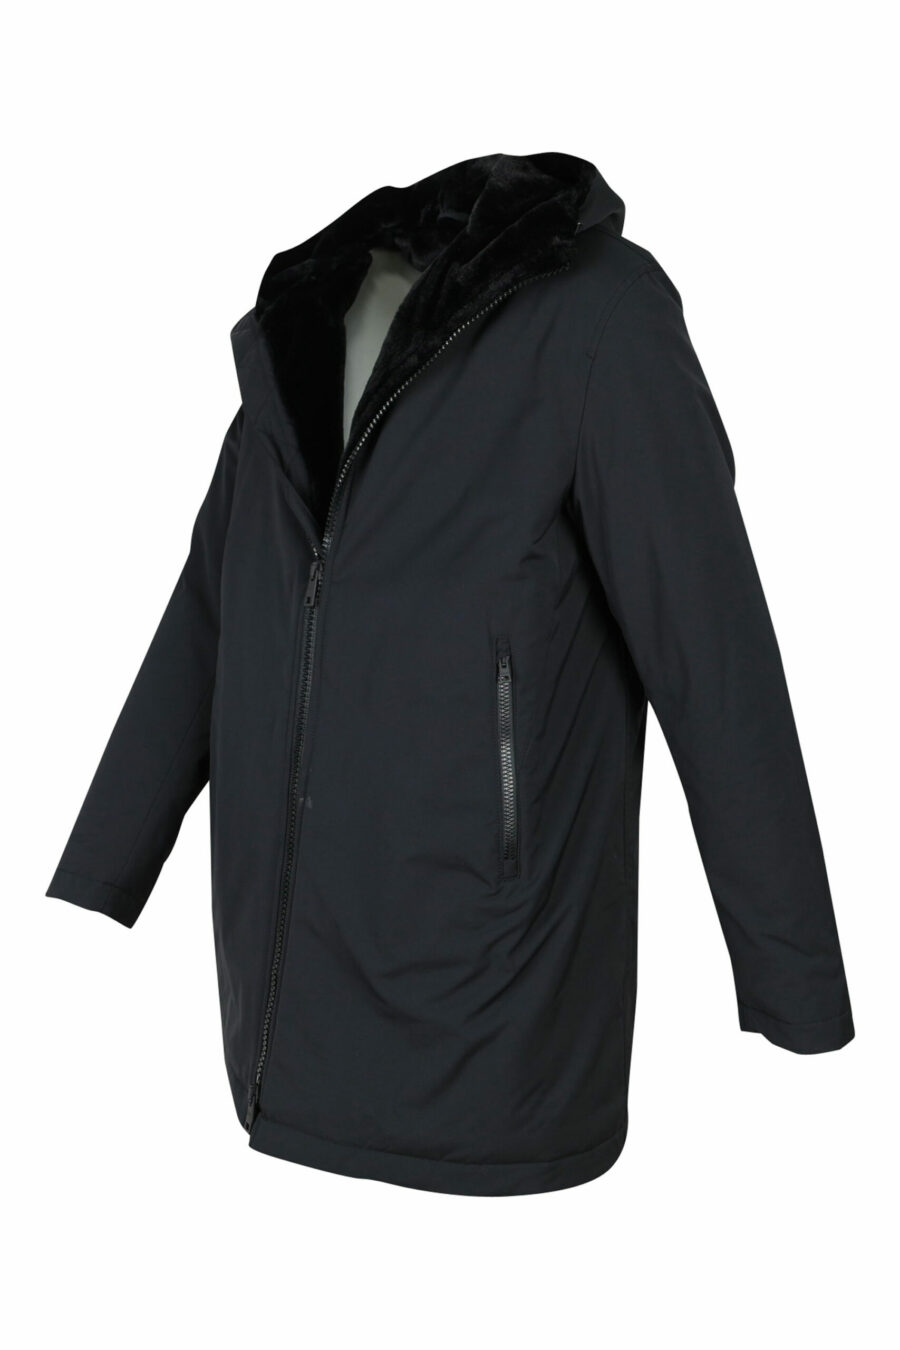 Black parka with hood and synthetic lining - 8055721650272 1 scaled